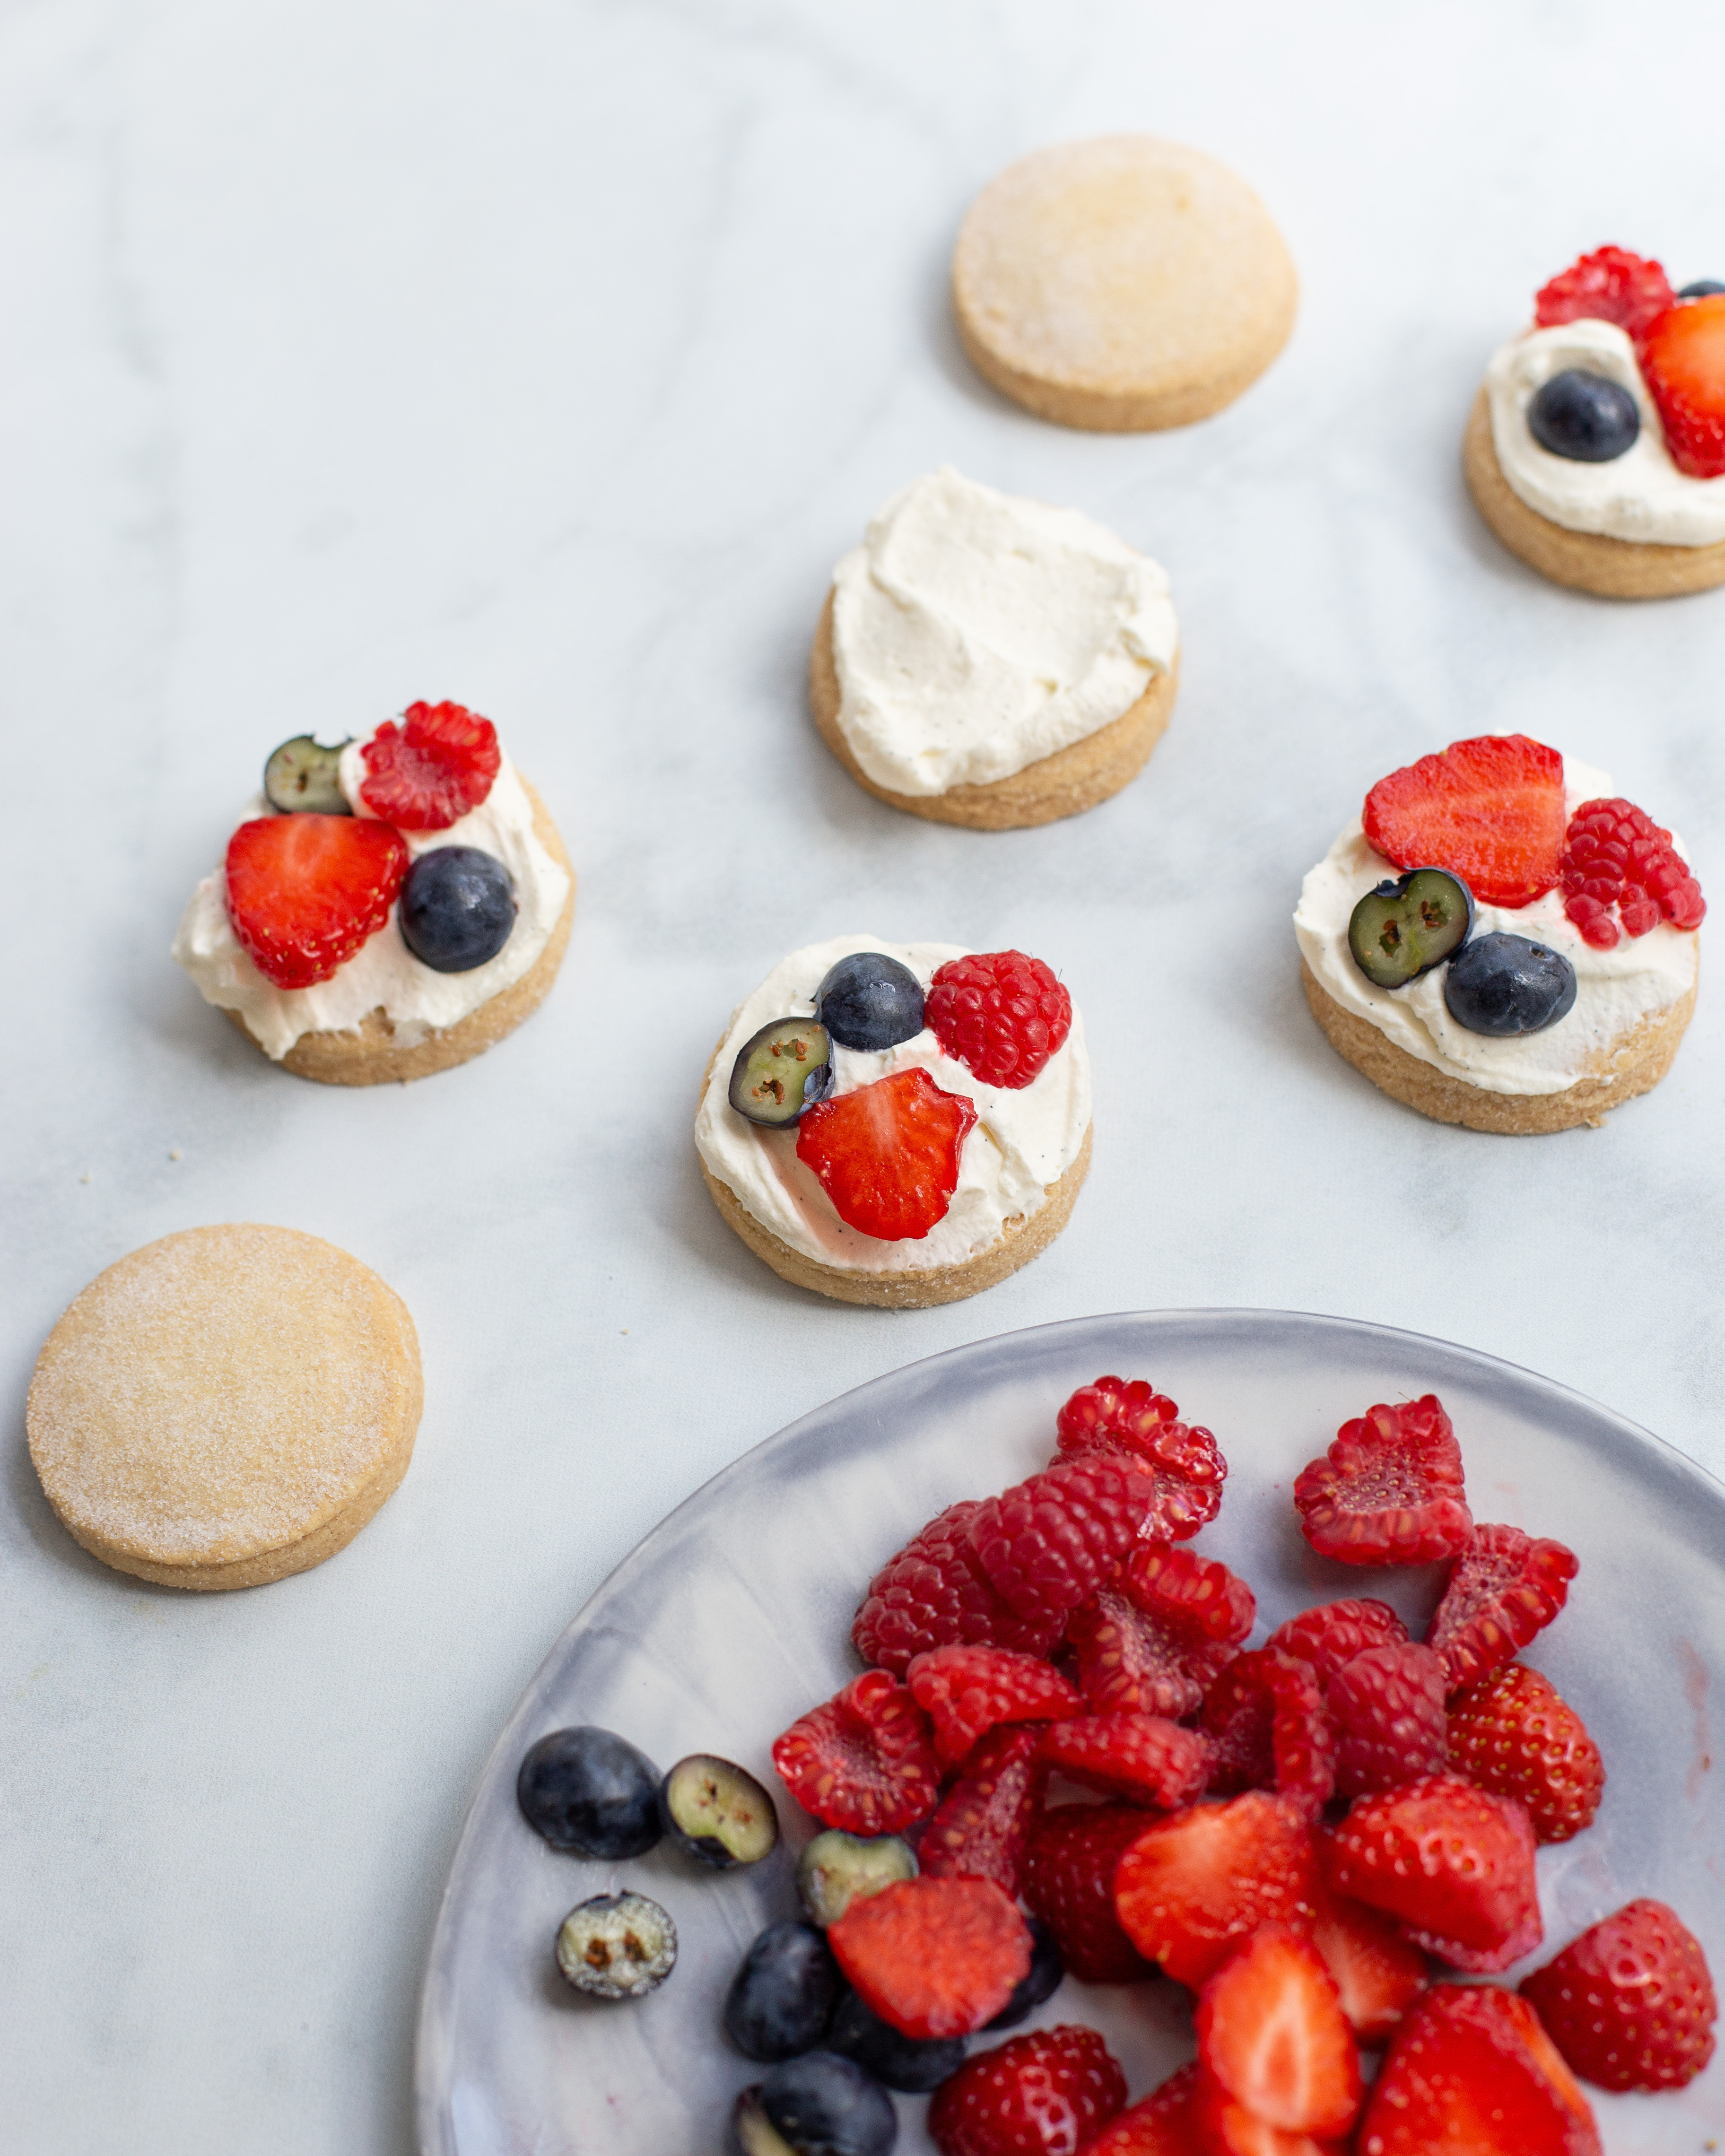 Top the shortbread rounds with your berries